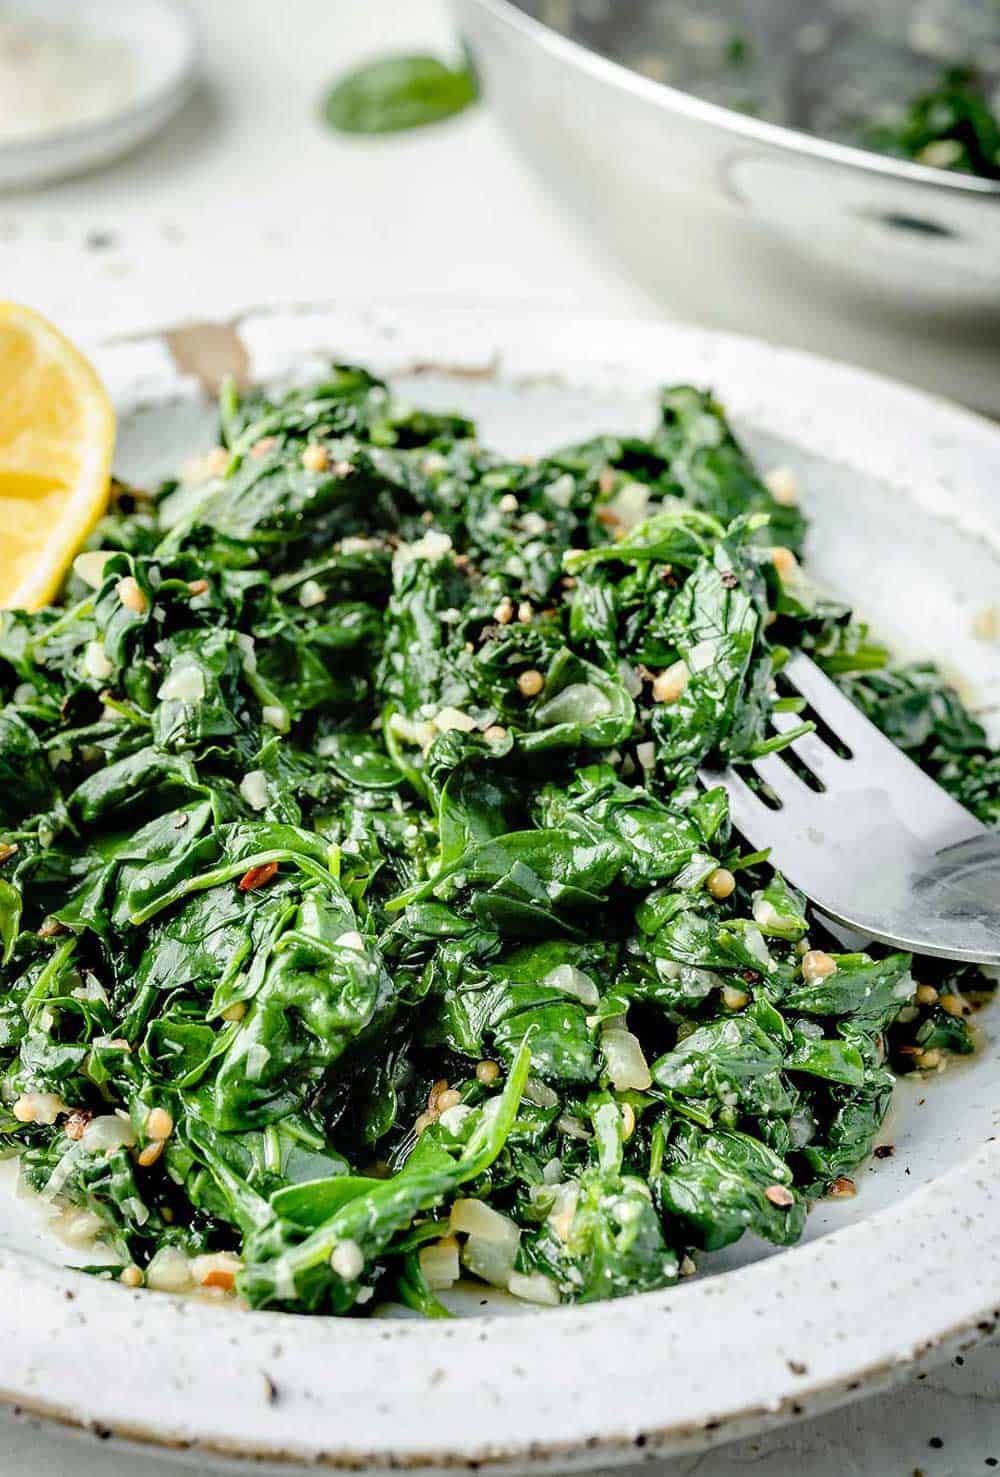 Sautéed Spinach with Garlic and Parmesan served on a white plate with a fork.